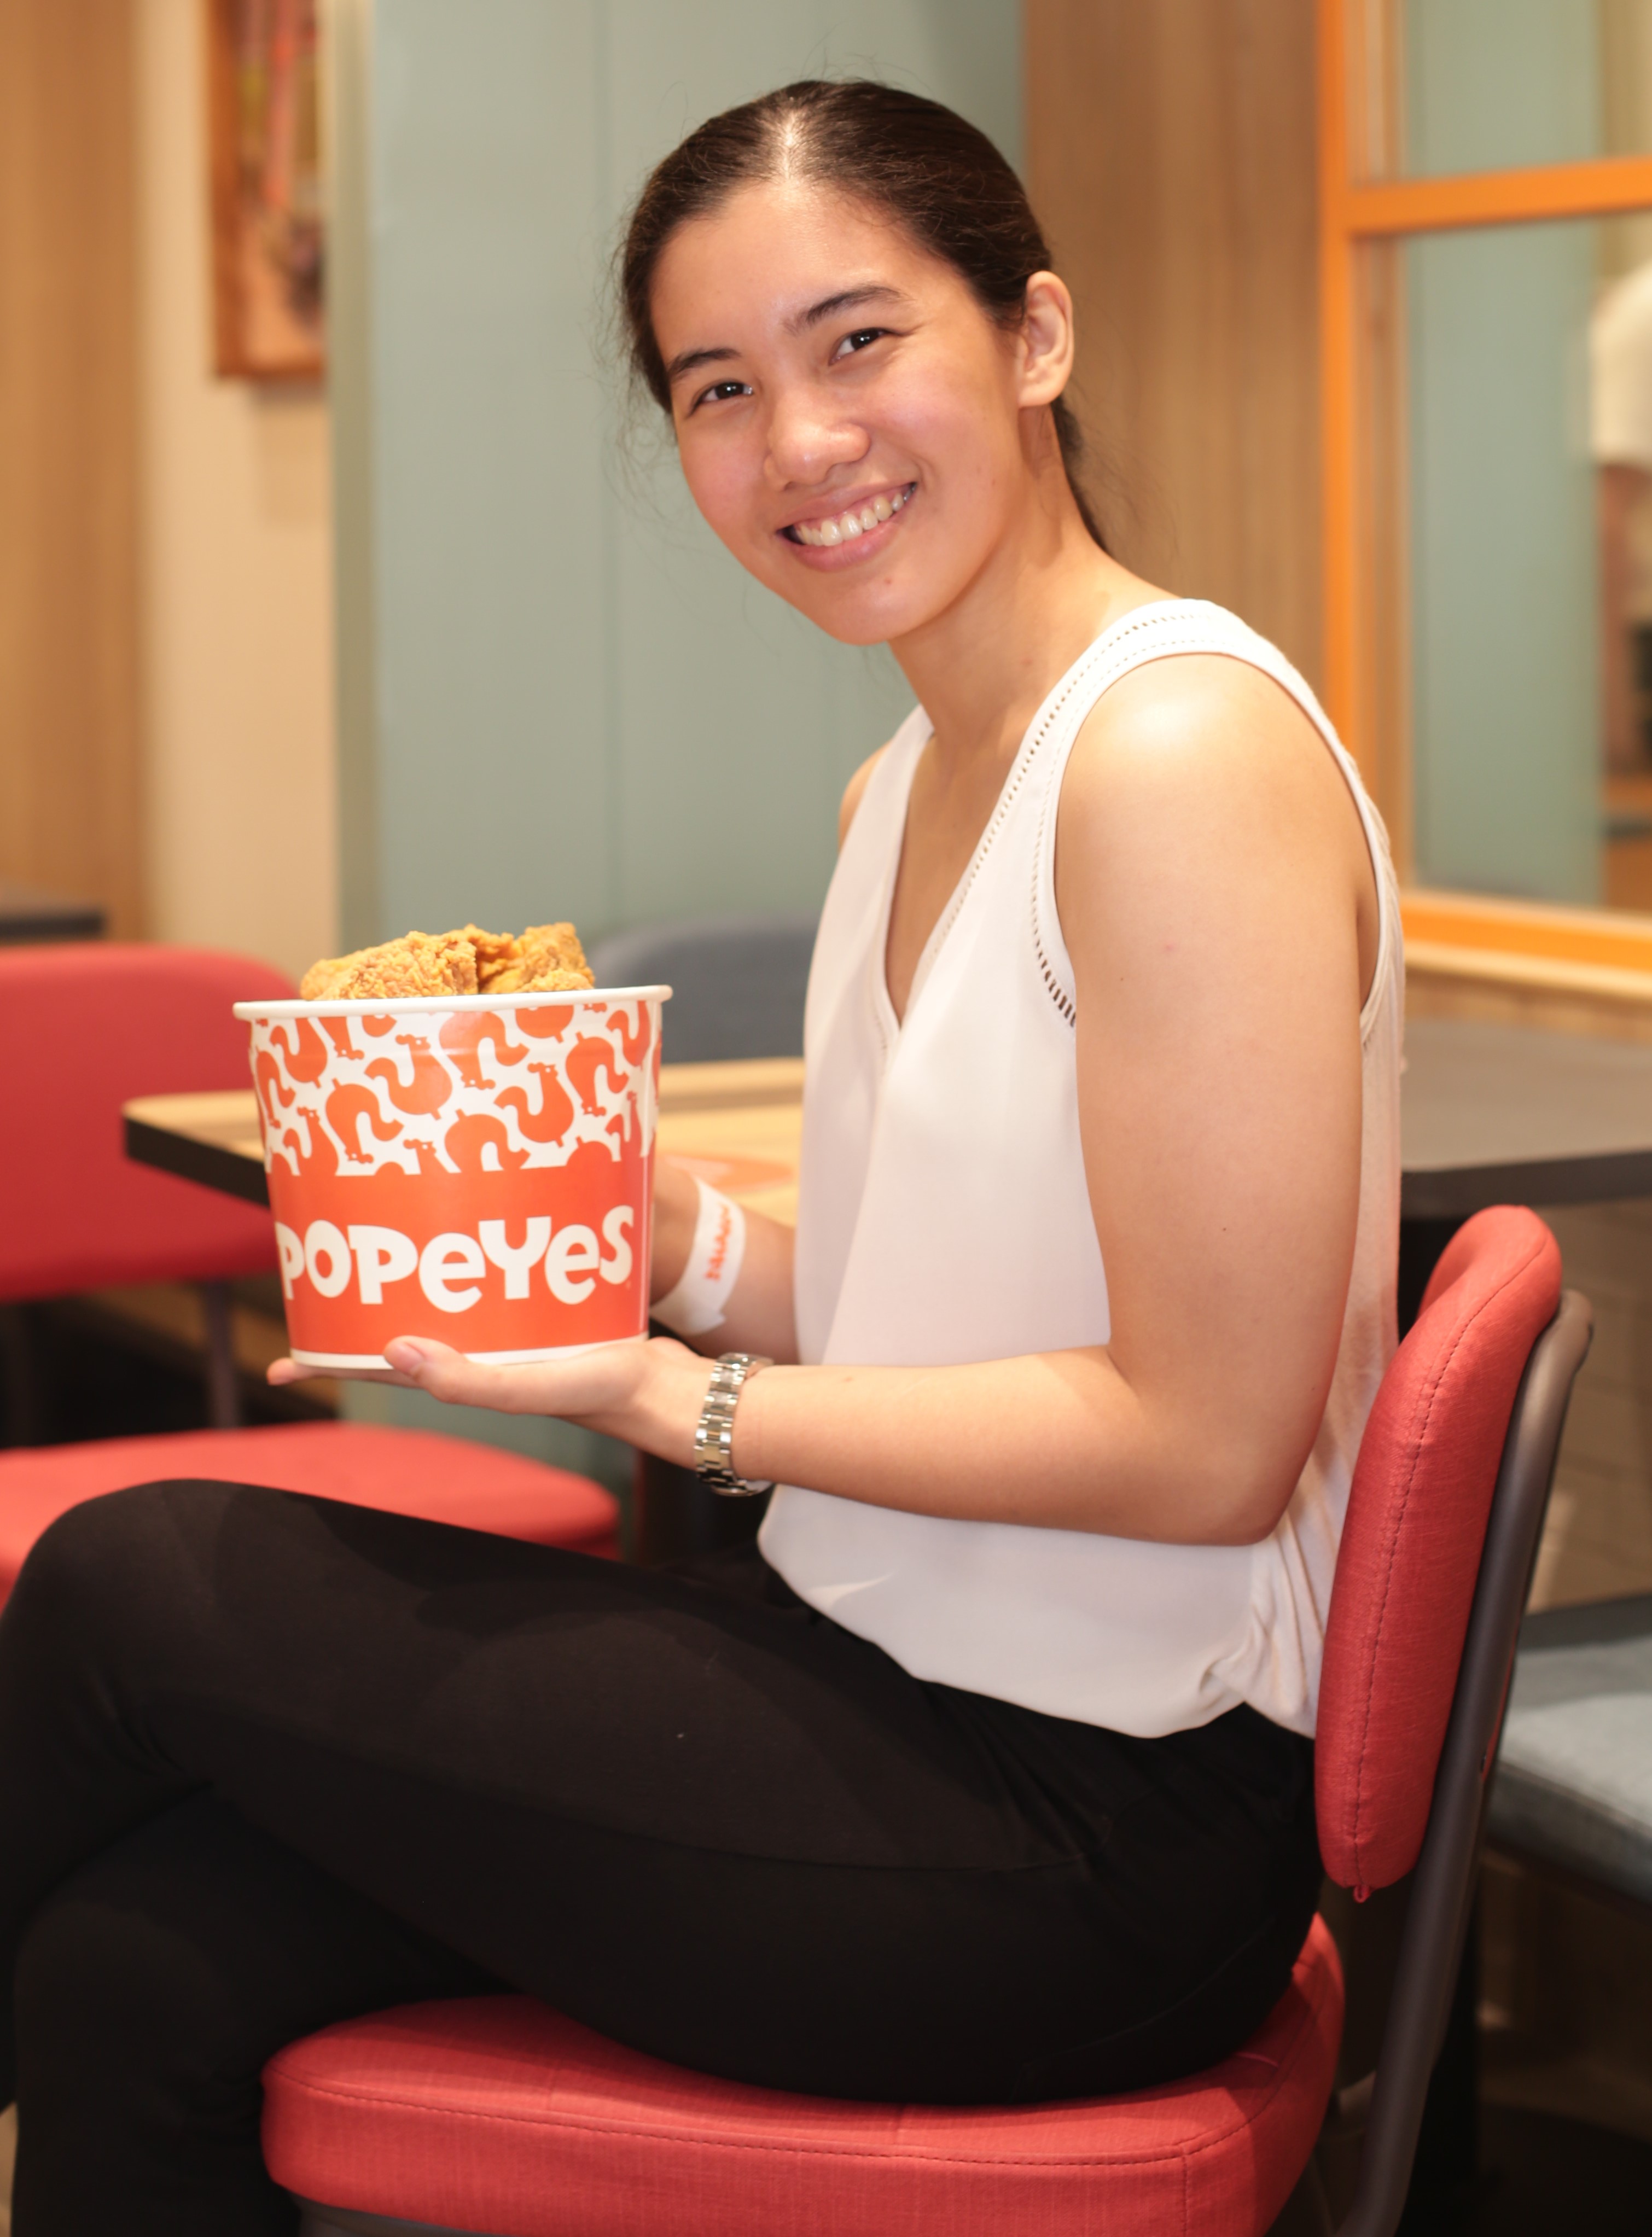 Biggest Popeyes branch in South East Asia open at SM MOA